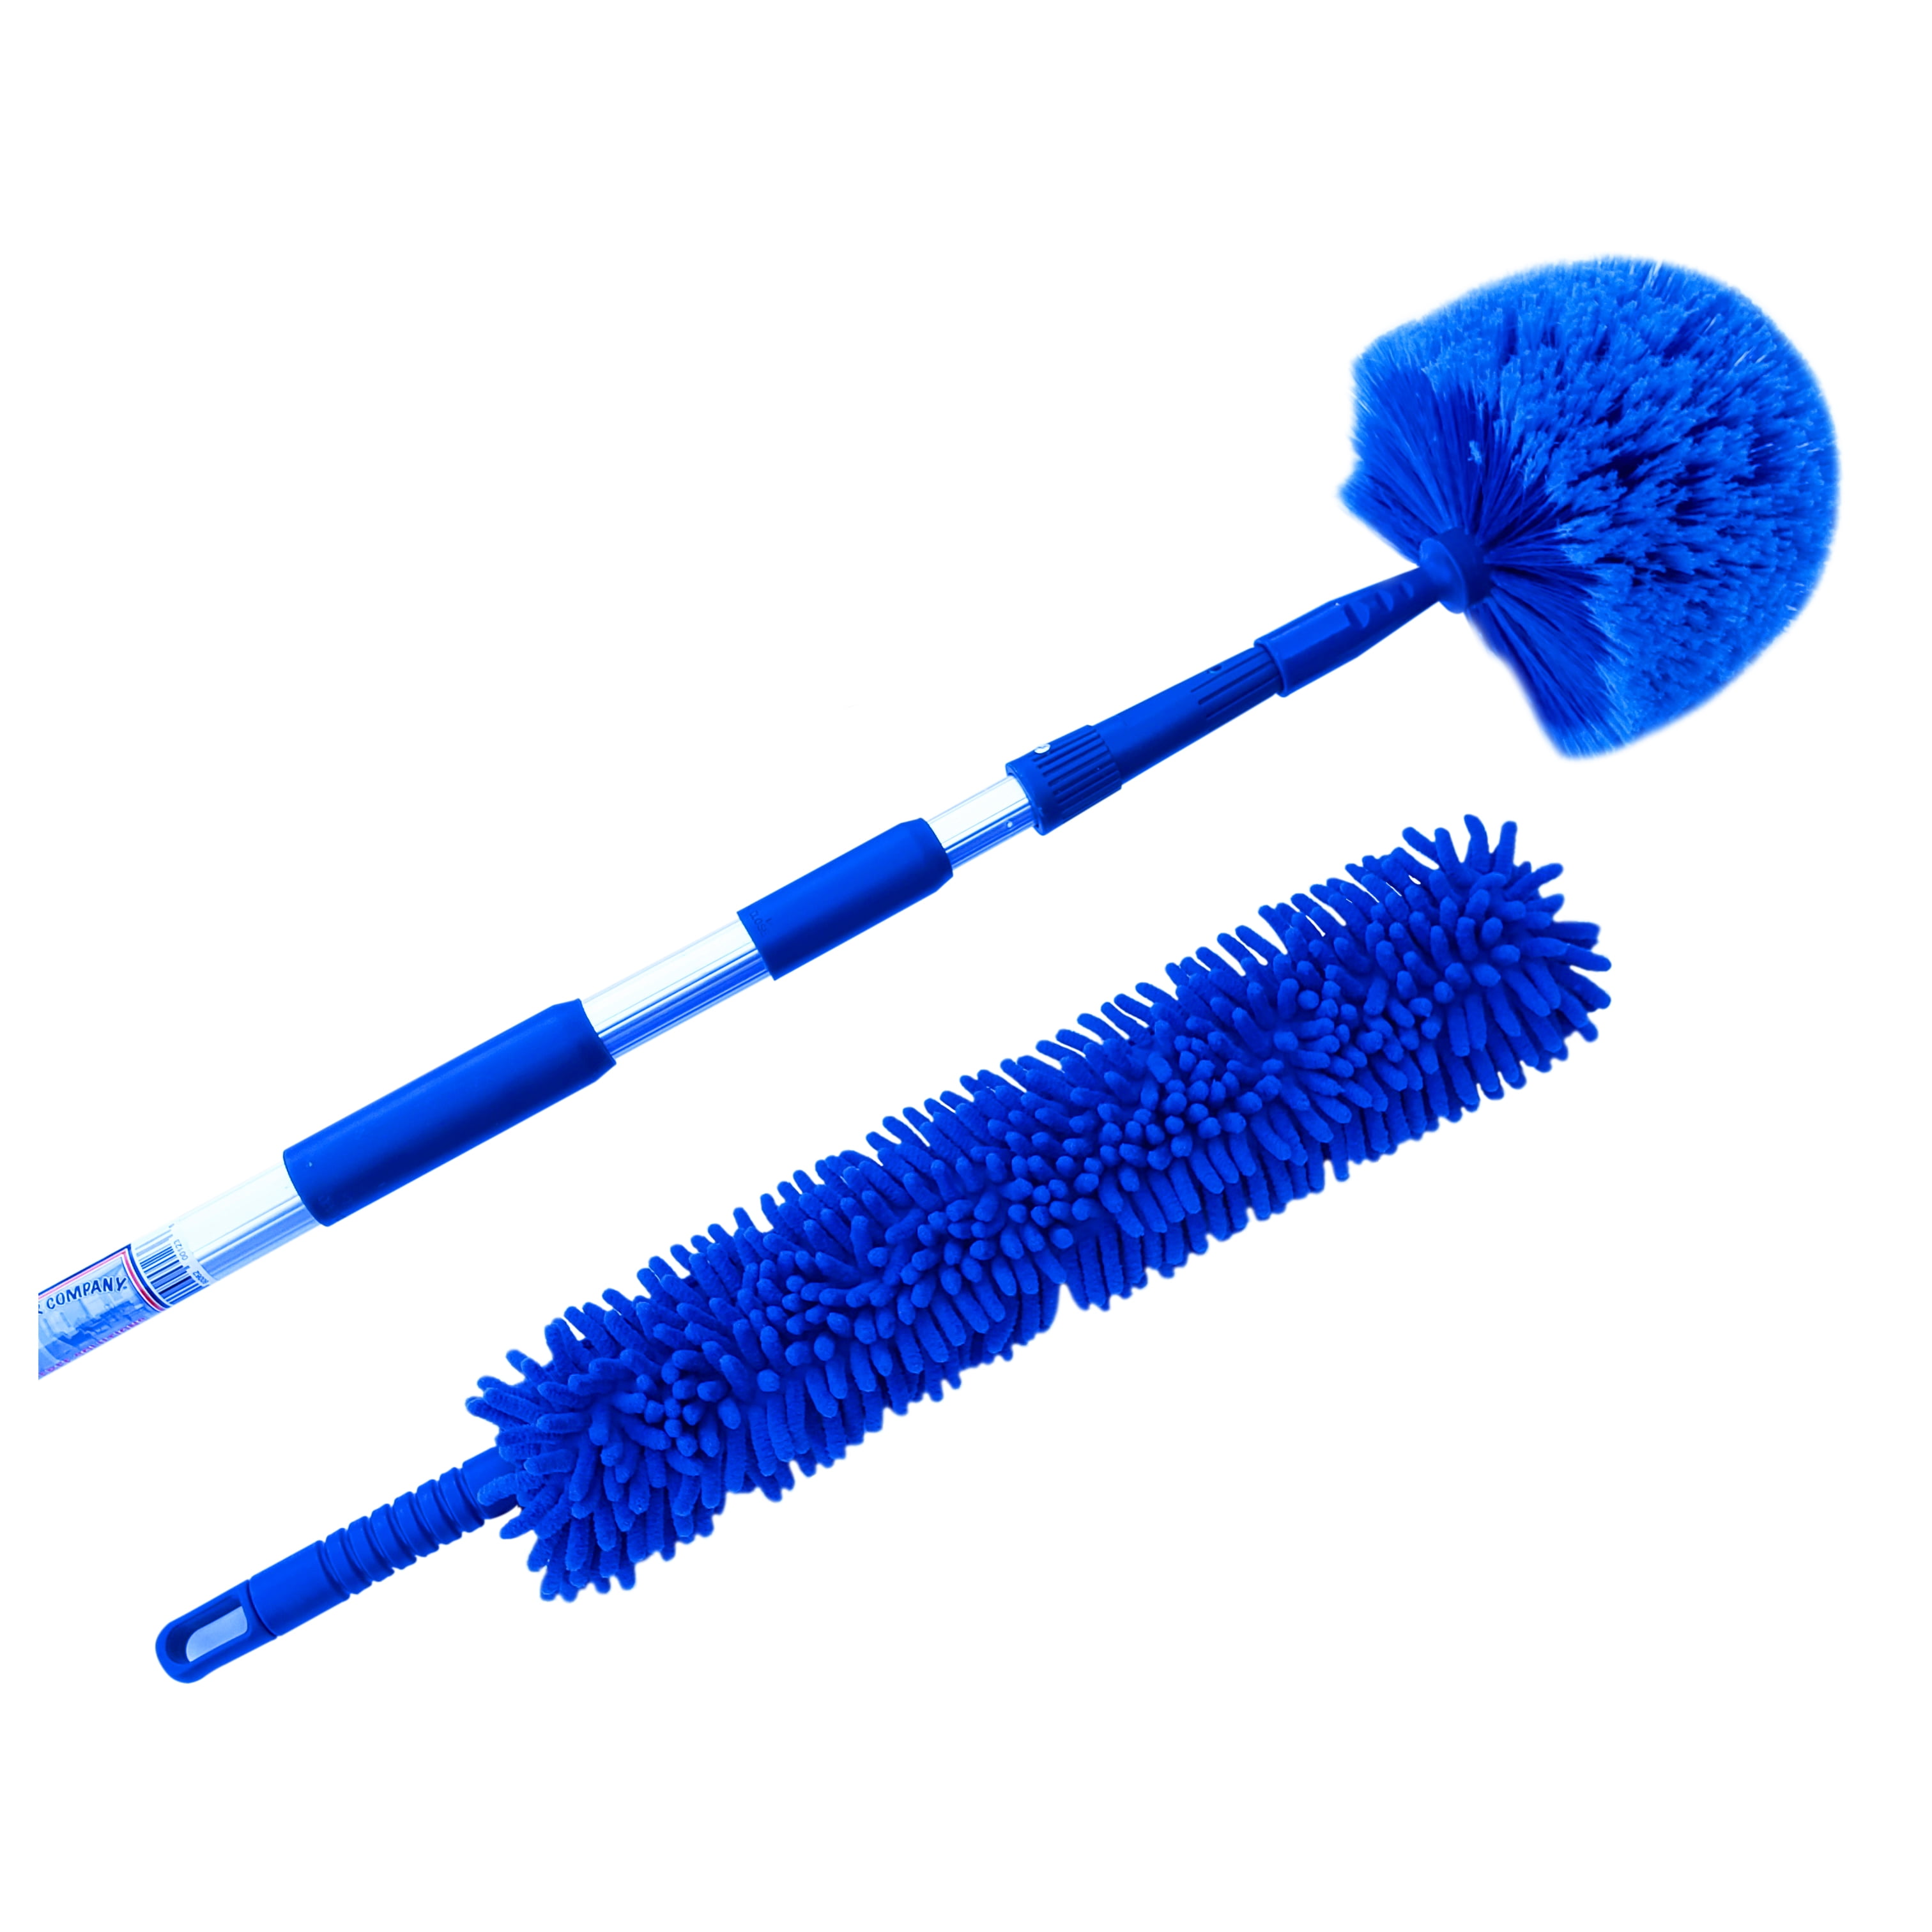 RADIATOR CLEANING BRUSH FLEXIBLE BRISTLE DUSTER LONG REACH COBWEB COVER CLEANER 